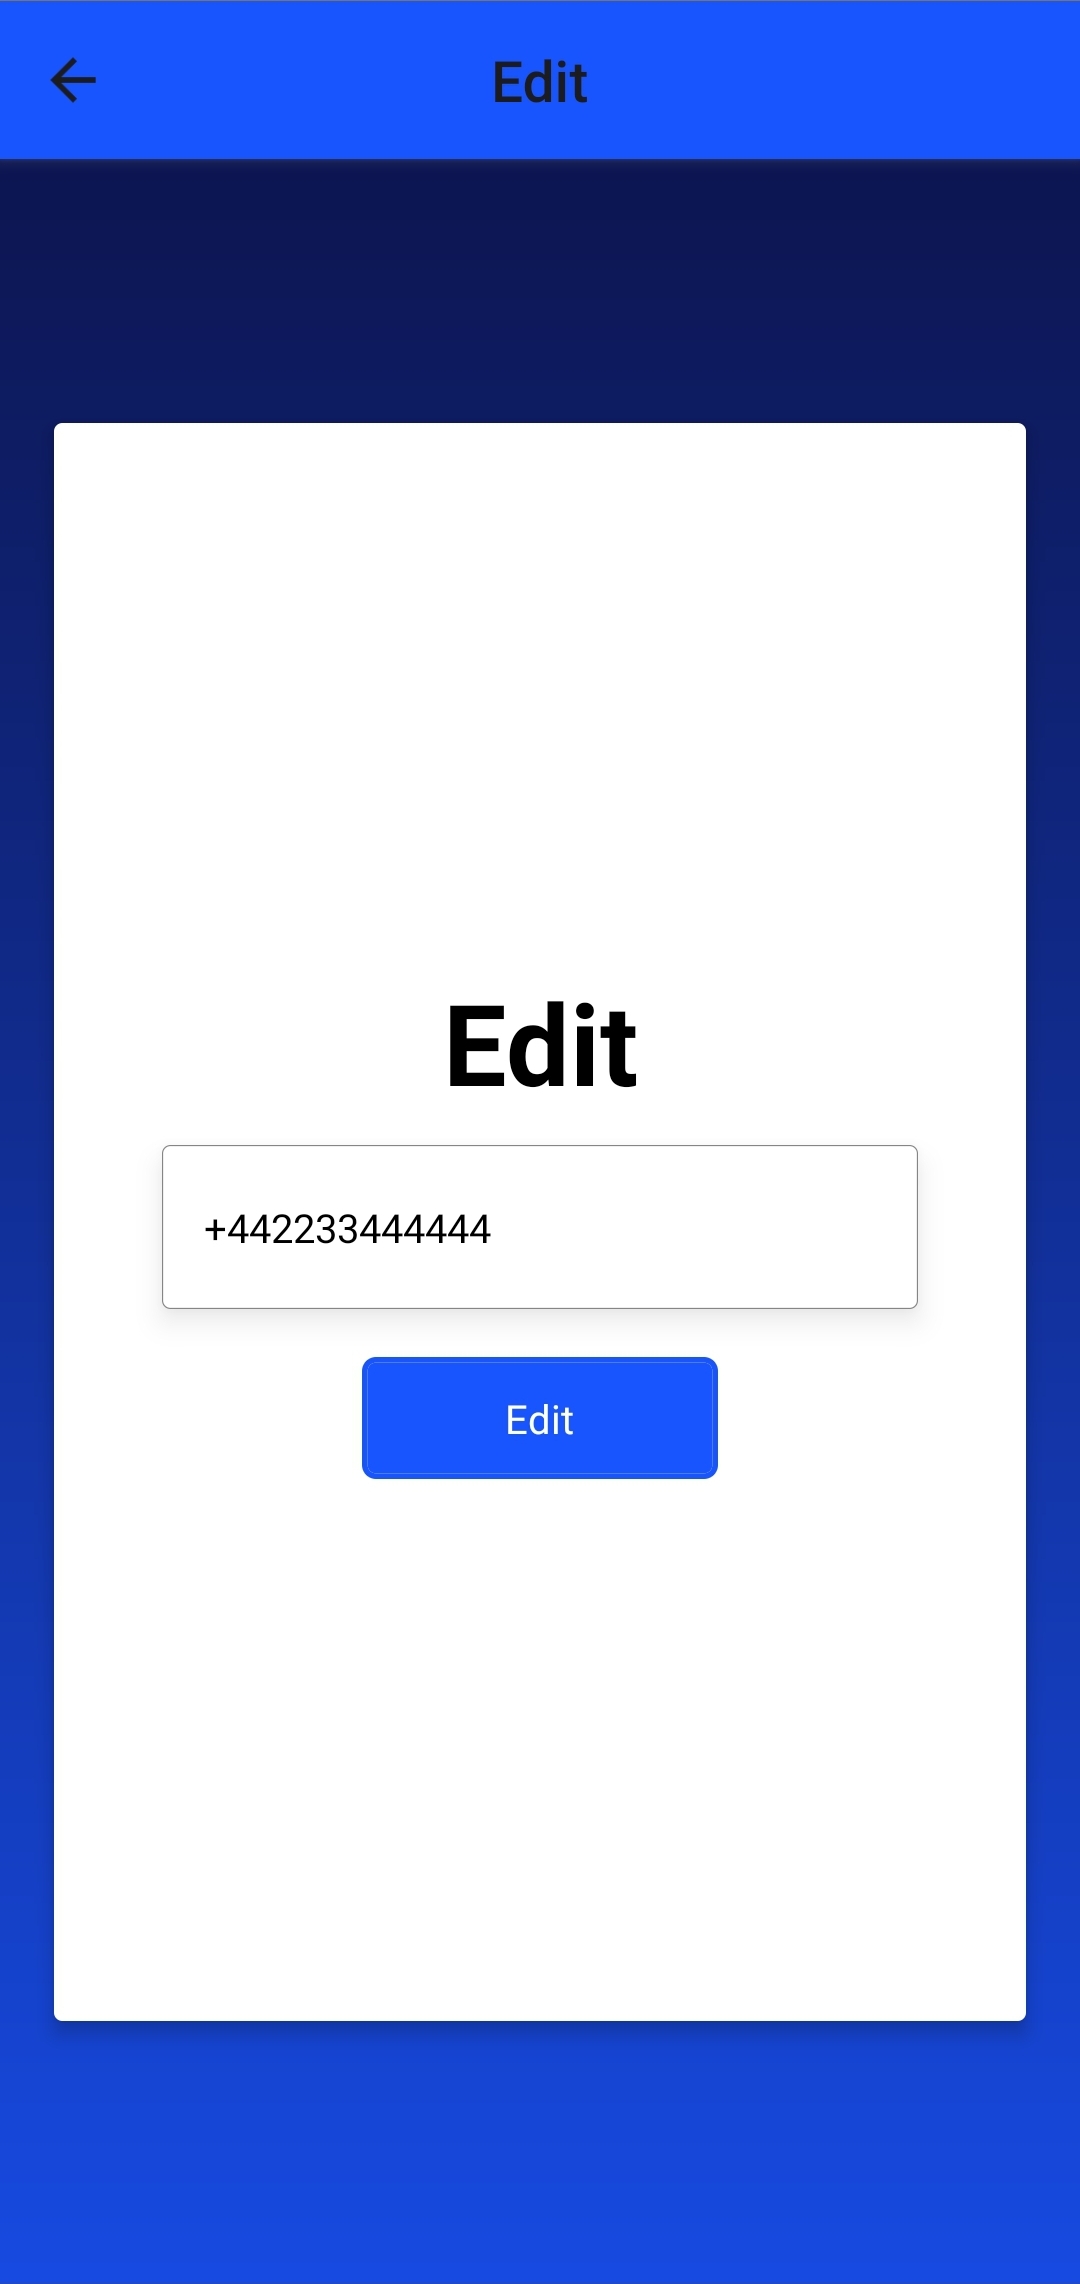 A screenshot of a mobile device running the demo tru.ID application. On this application is a white card, with a label 'Edit', a textinput with a demo phone number, and a blue button labelled 'Edit'